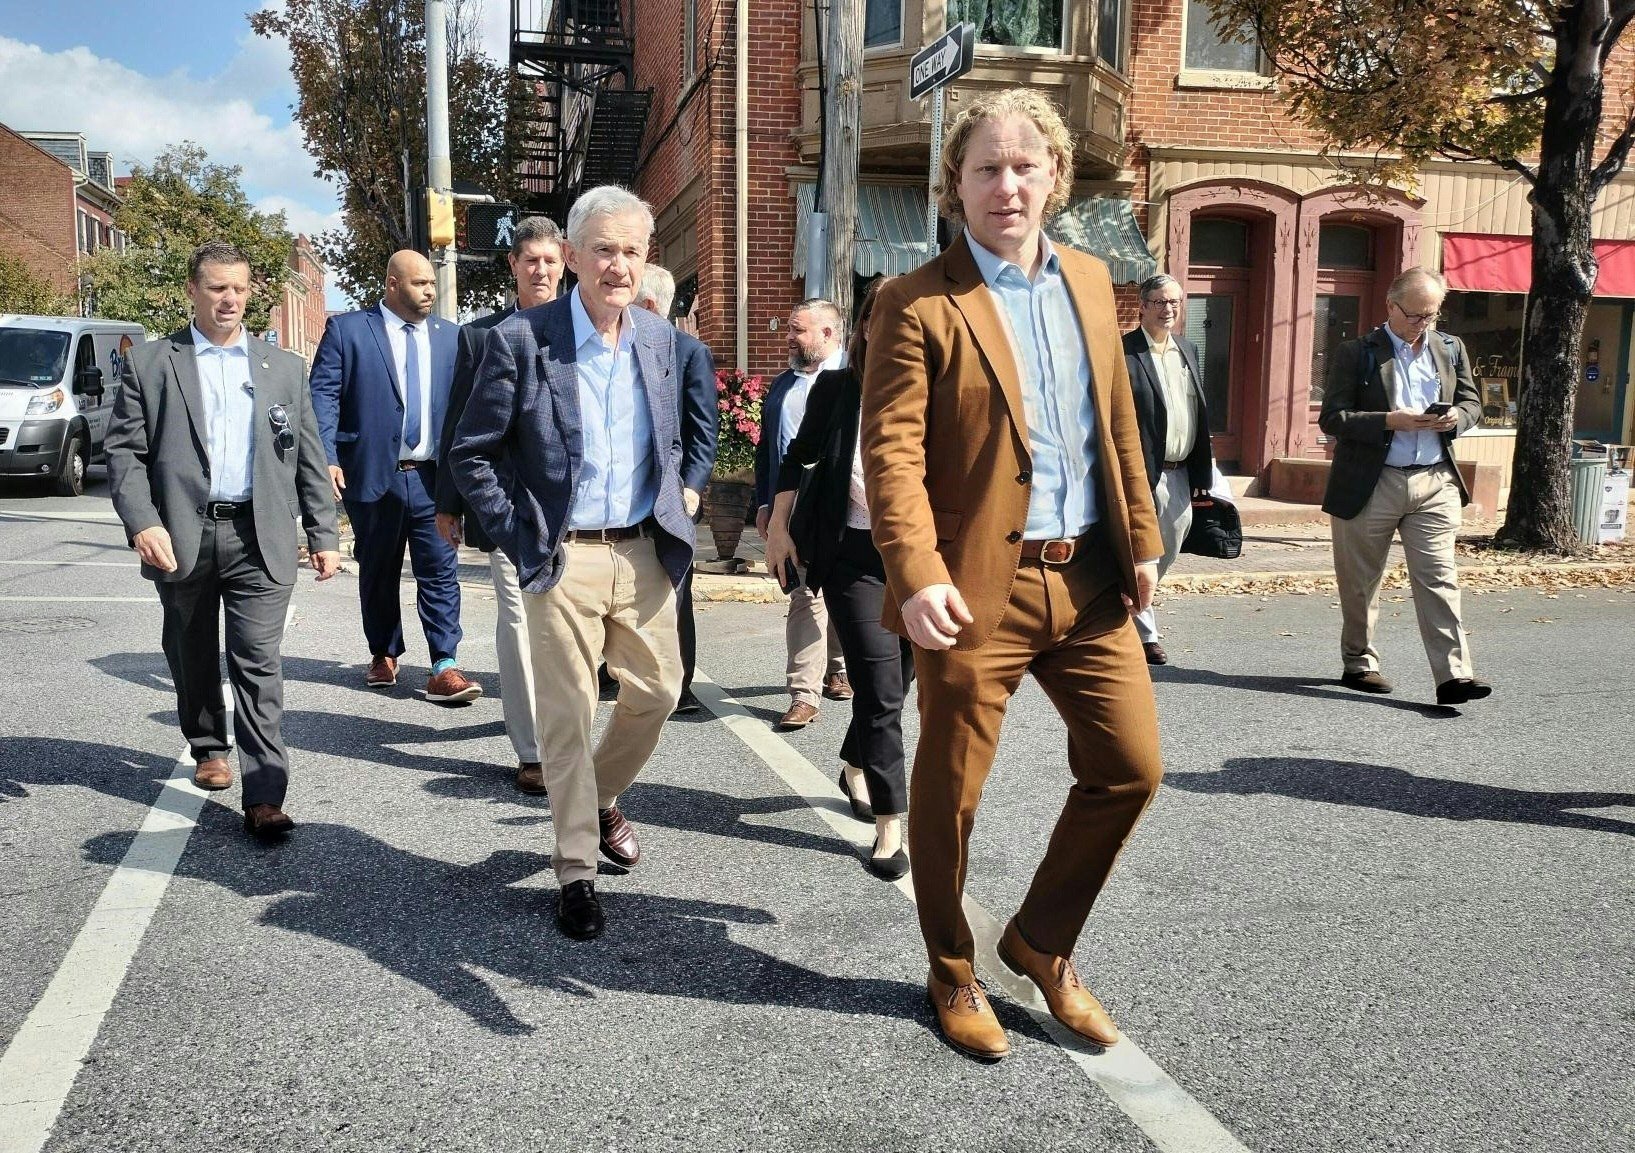 US Federal Reserve chairman Jerome Powell (centre) and Kevin Schreiber (foreground), president of the York County Economic Alliance, walk down the street during a visit to York, Pennsylvania, on October 2, to meet local economic players. Photo: AFP 